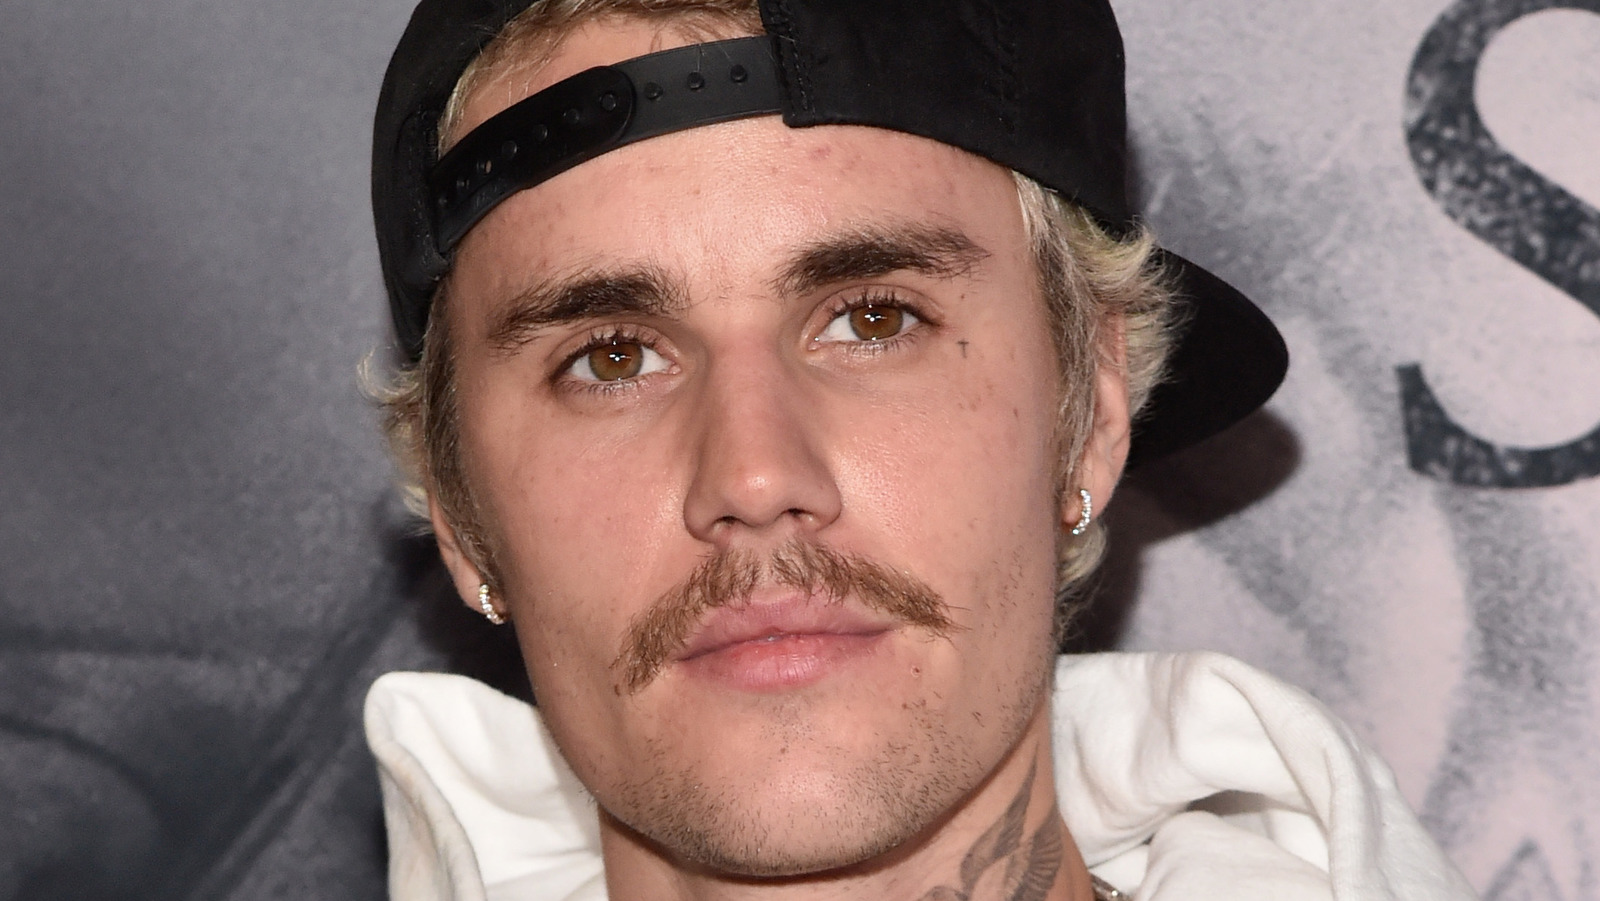 Justin Bieber 'Peaches' Lyrics & Meaning Explained As He Sings